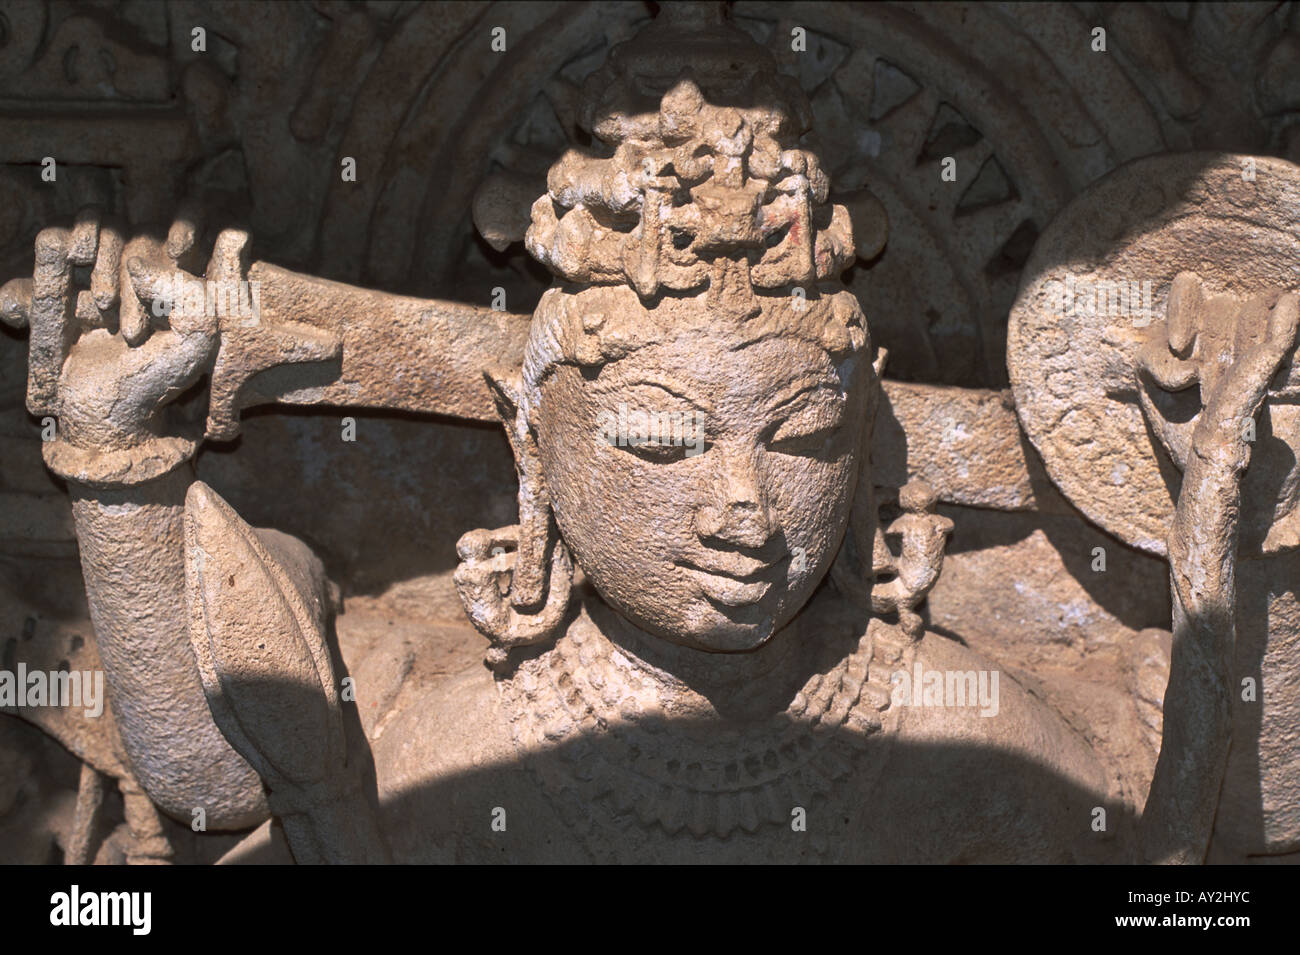 Carved stone figure with sword, Patan step well called the Rani ki vav, Gujarat, India. Built about 1050 A.D. Stock Photo